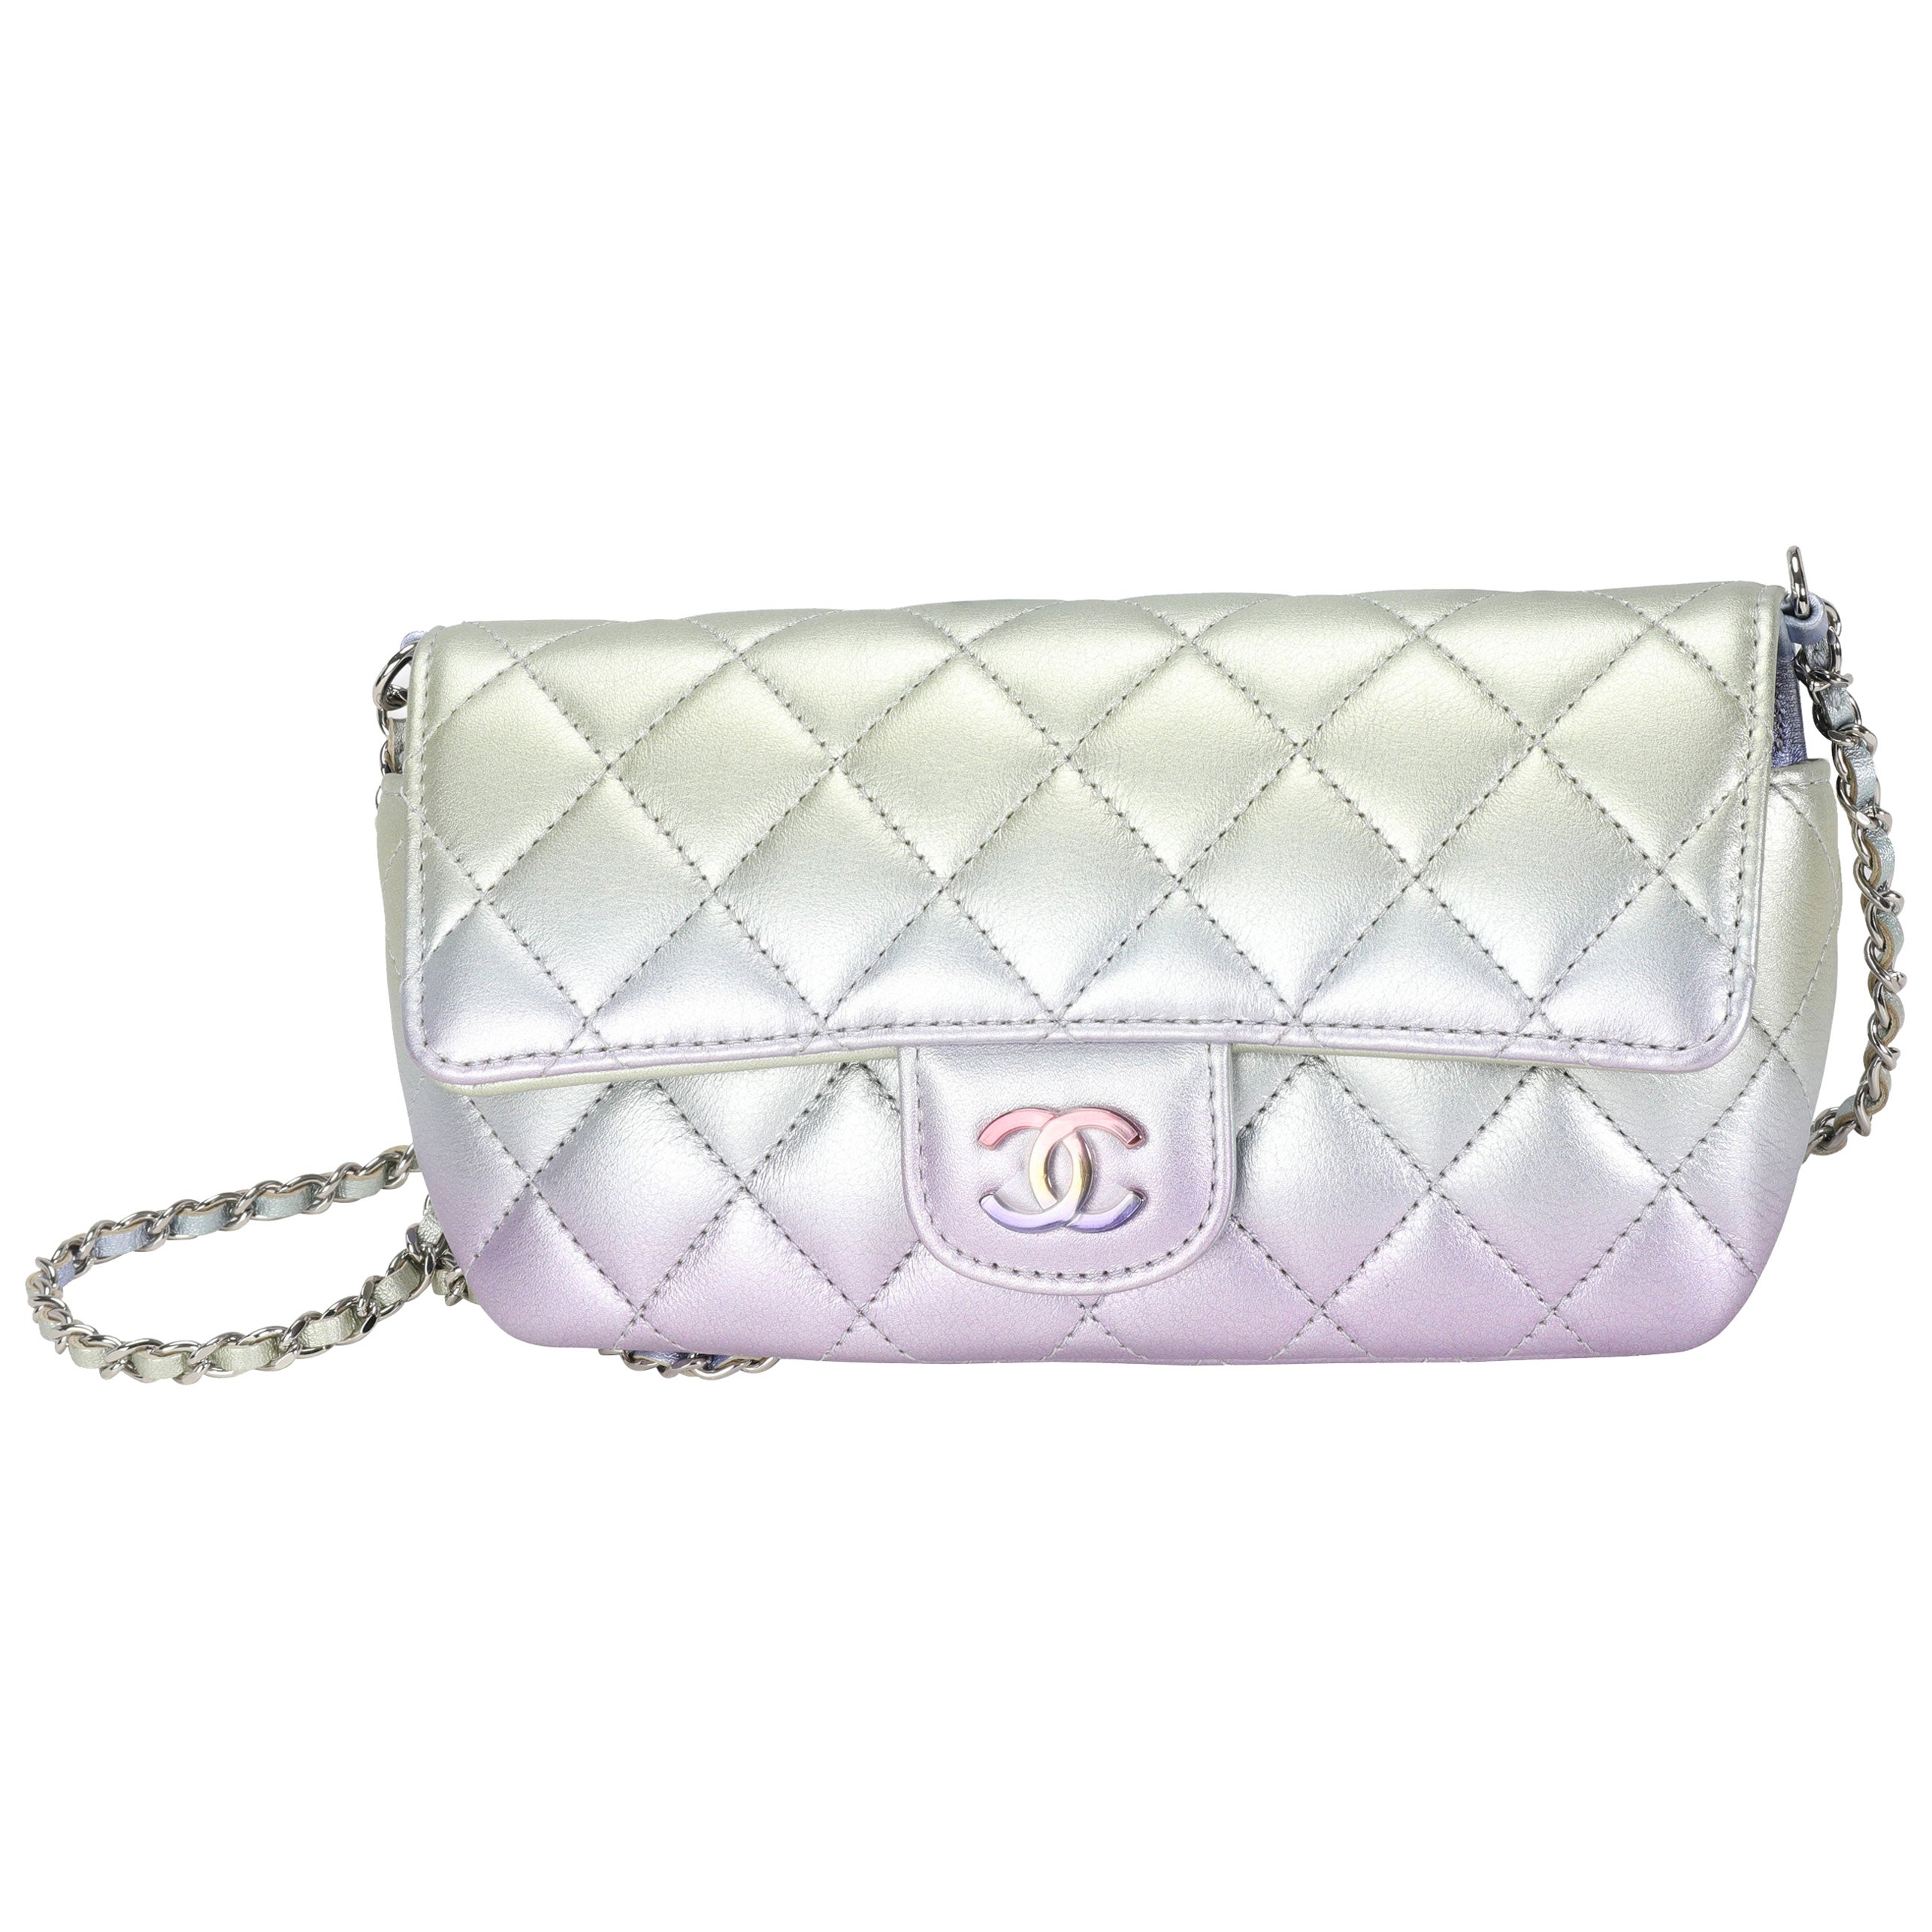 Chanel Gradient Metallic Quilted Calfskin Leather Clutch Bag Silver